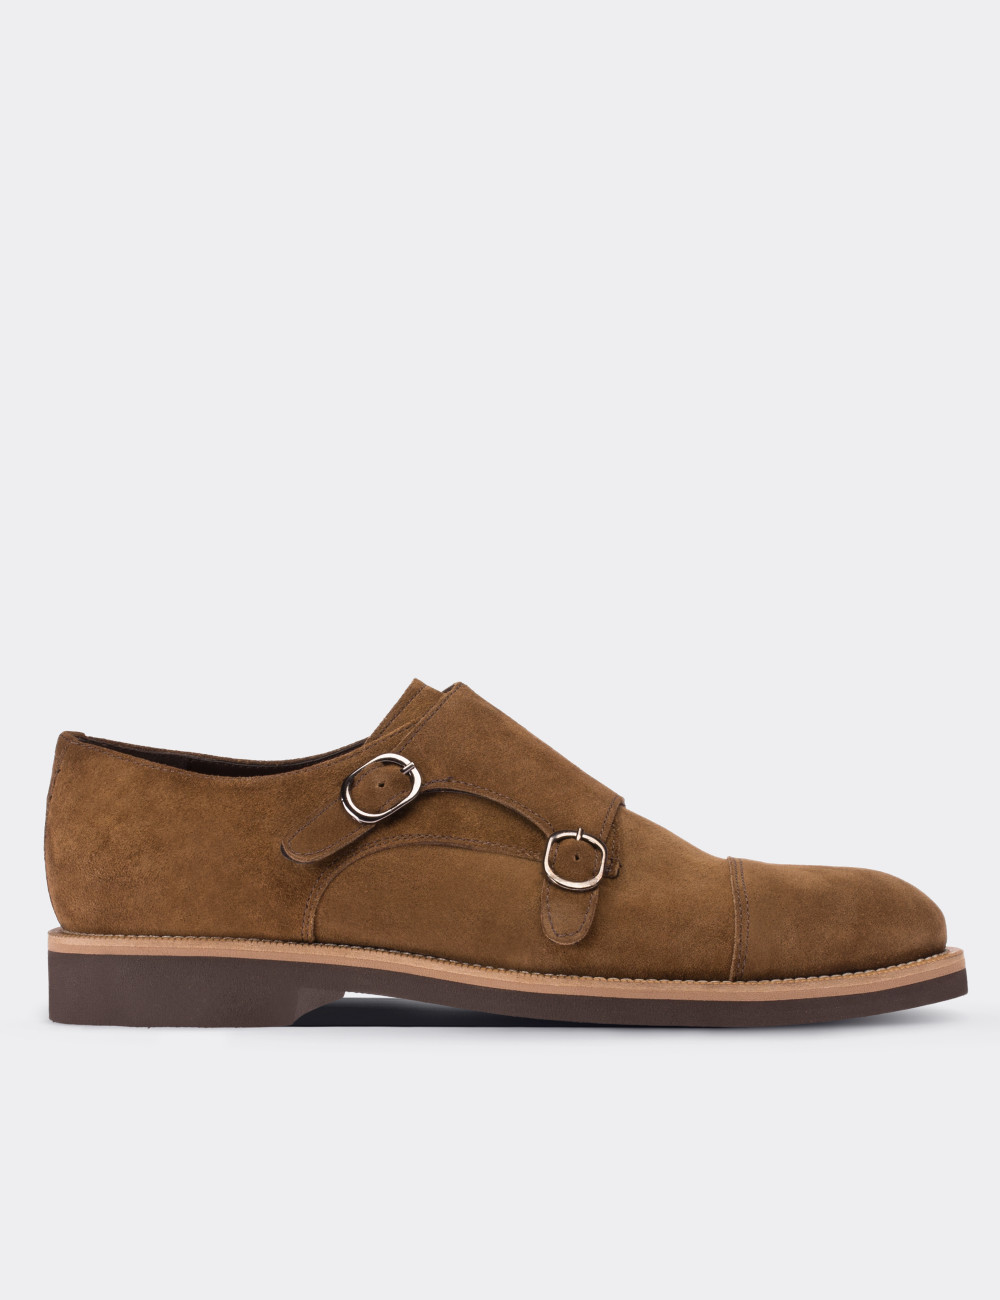 Tan Suede Leather Monk Straps Shoes - 01566MTBAE01